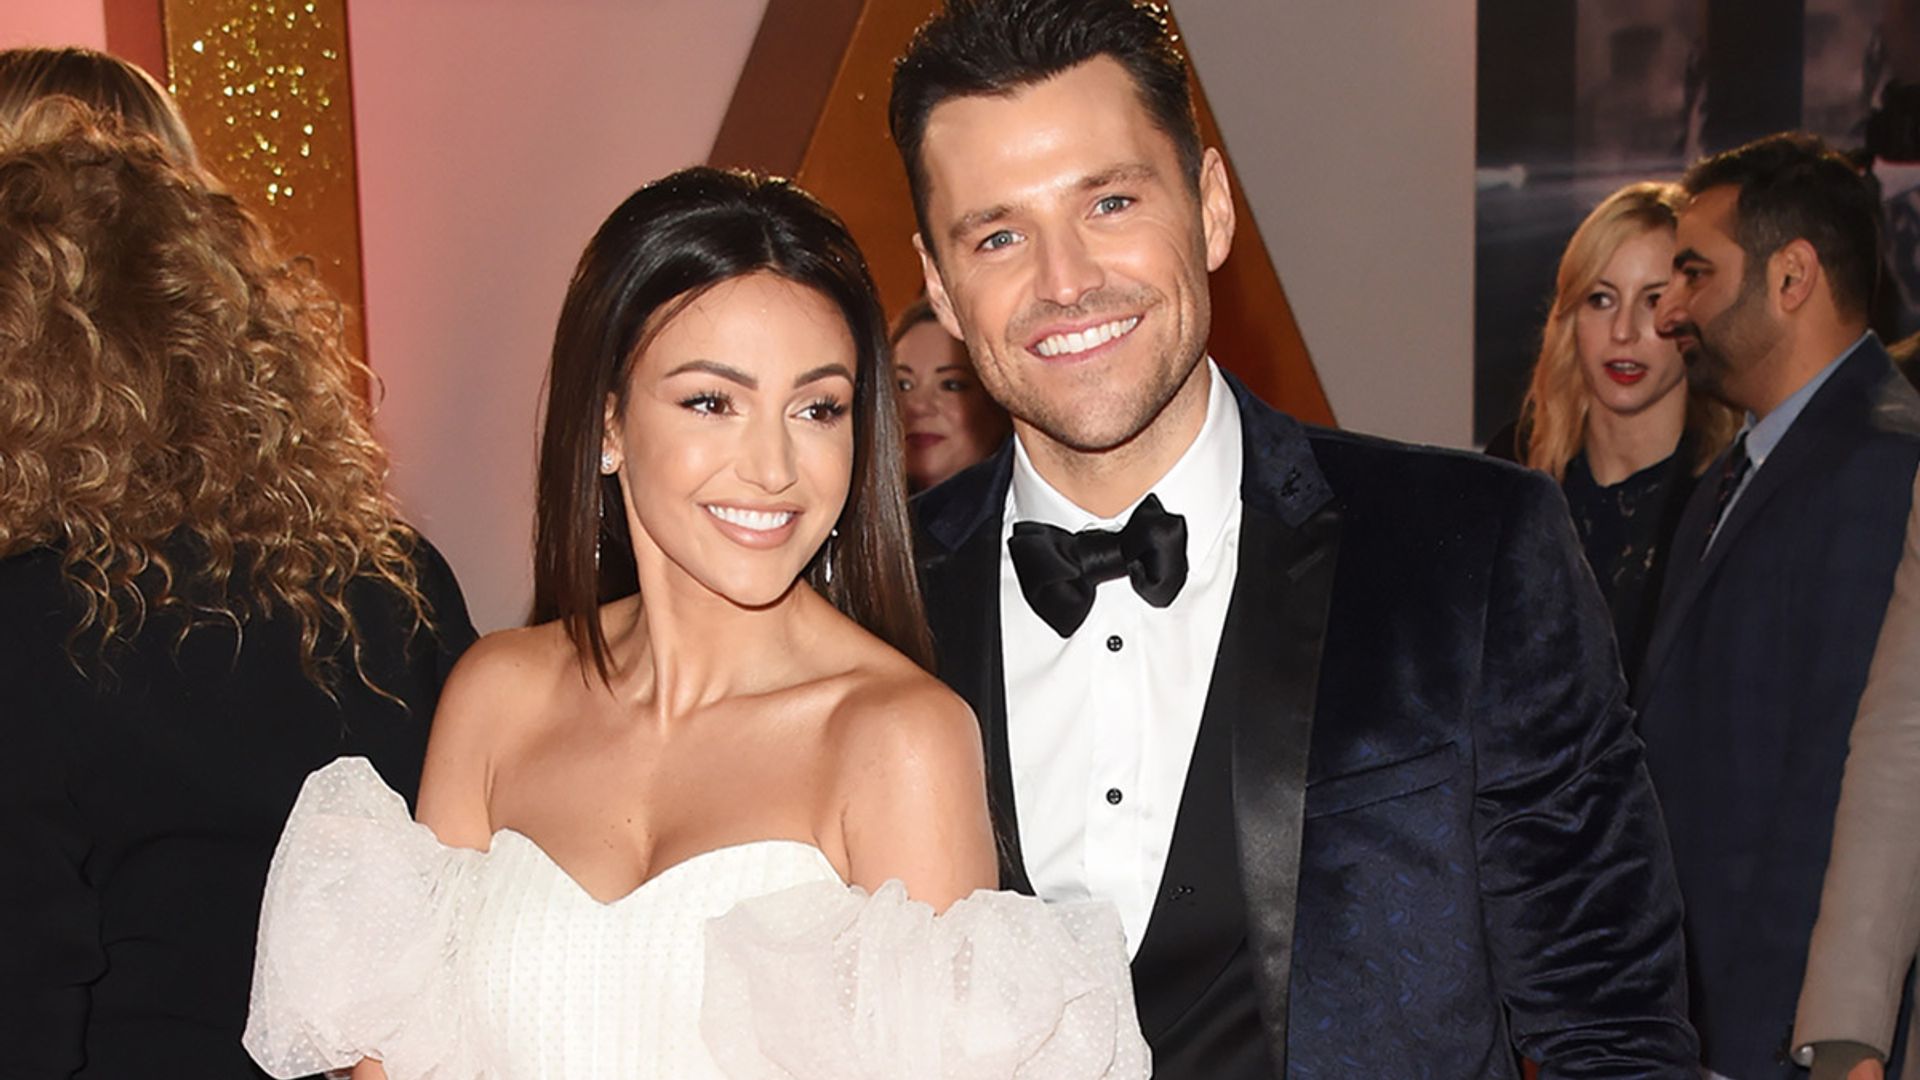 'I was Michelle Keegan and Mark Wright's wedding guest – and it was as spectacular as it looked'